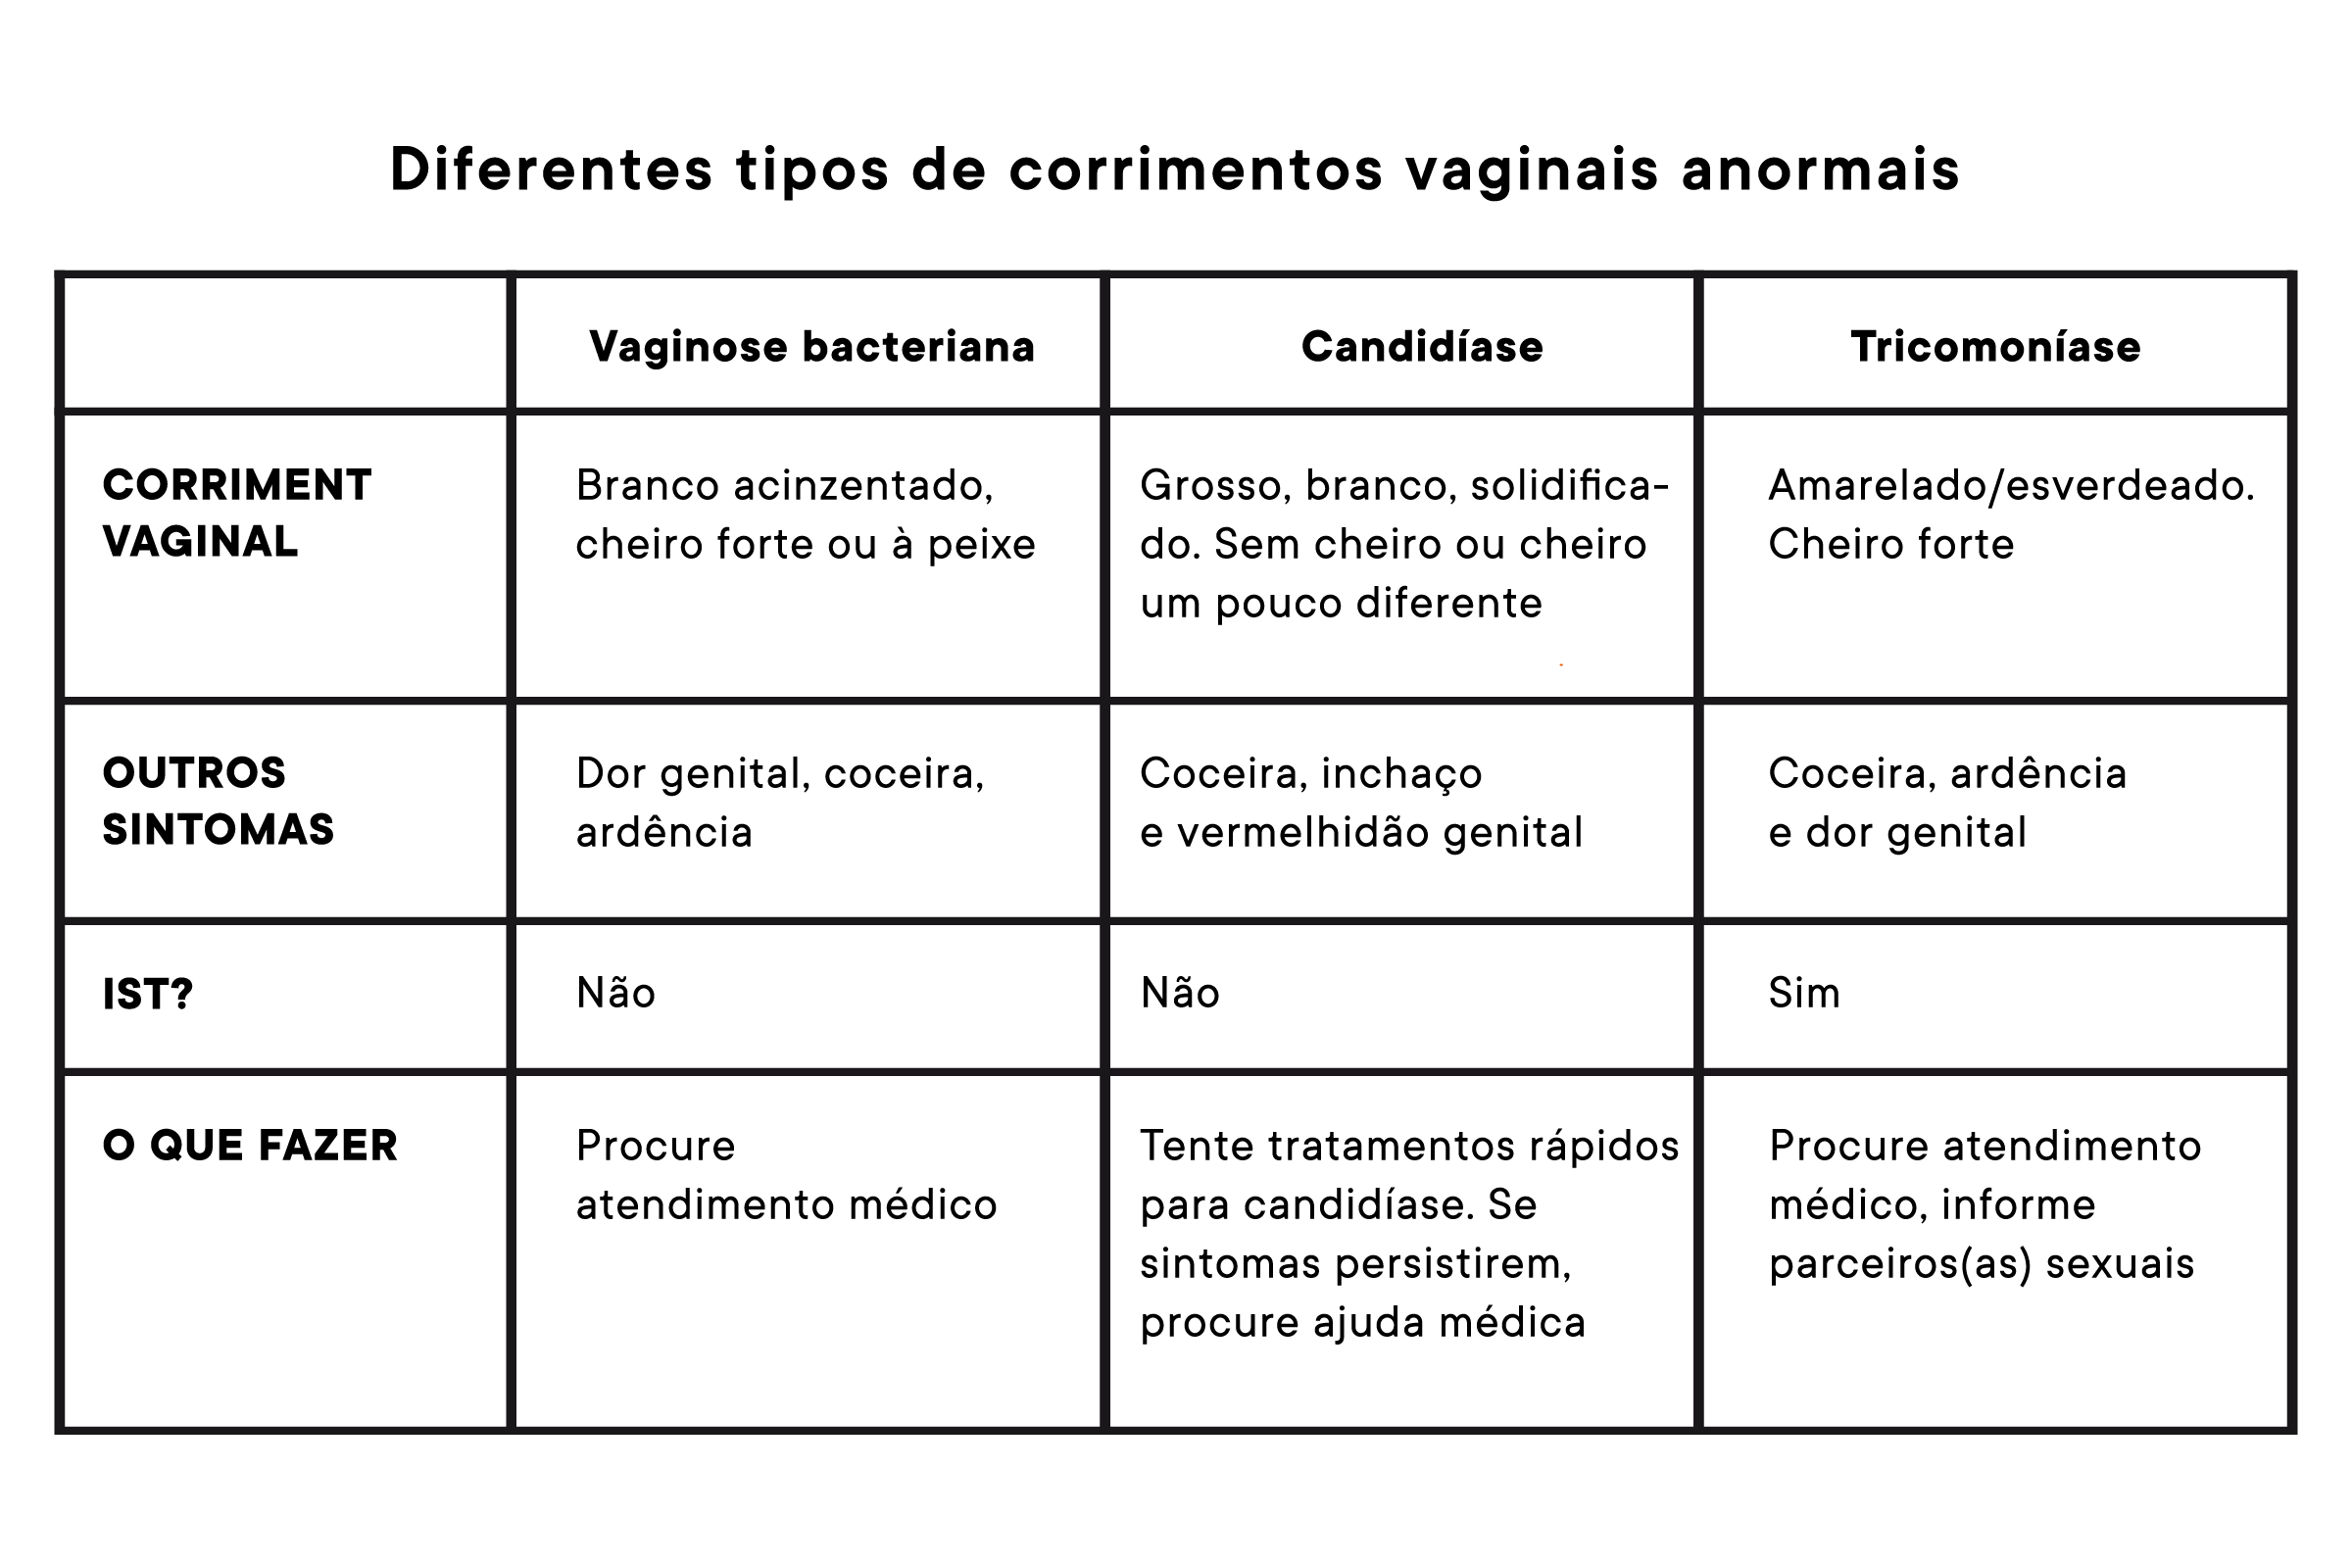 Table showing different types of vaginal infections, related discharge and other symptoms, and what to do. 